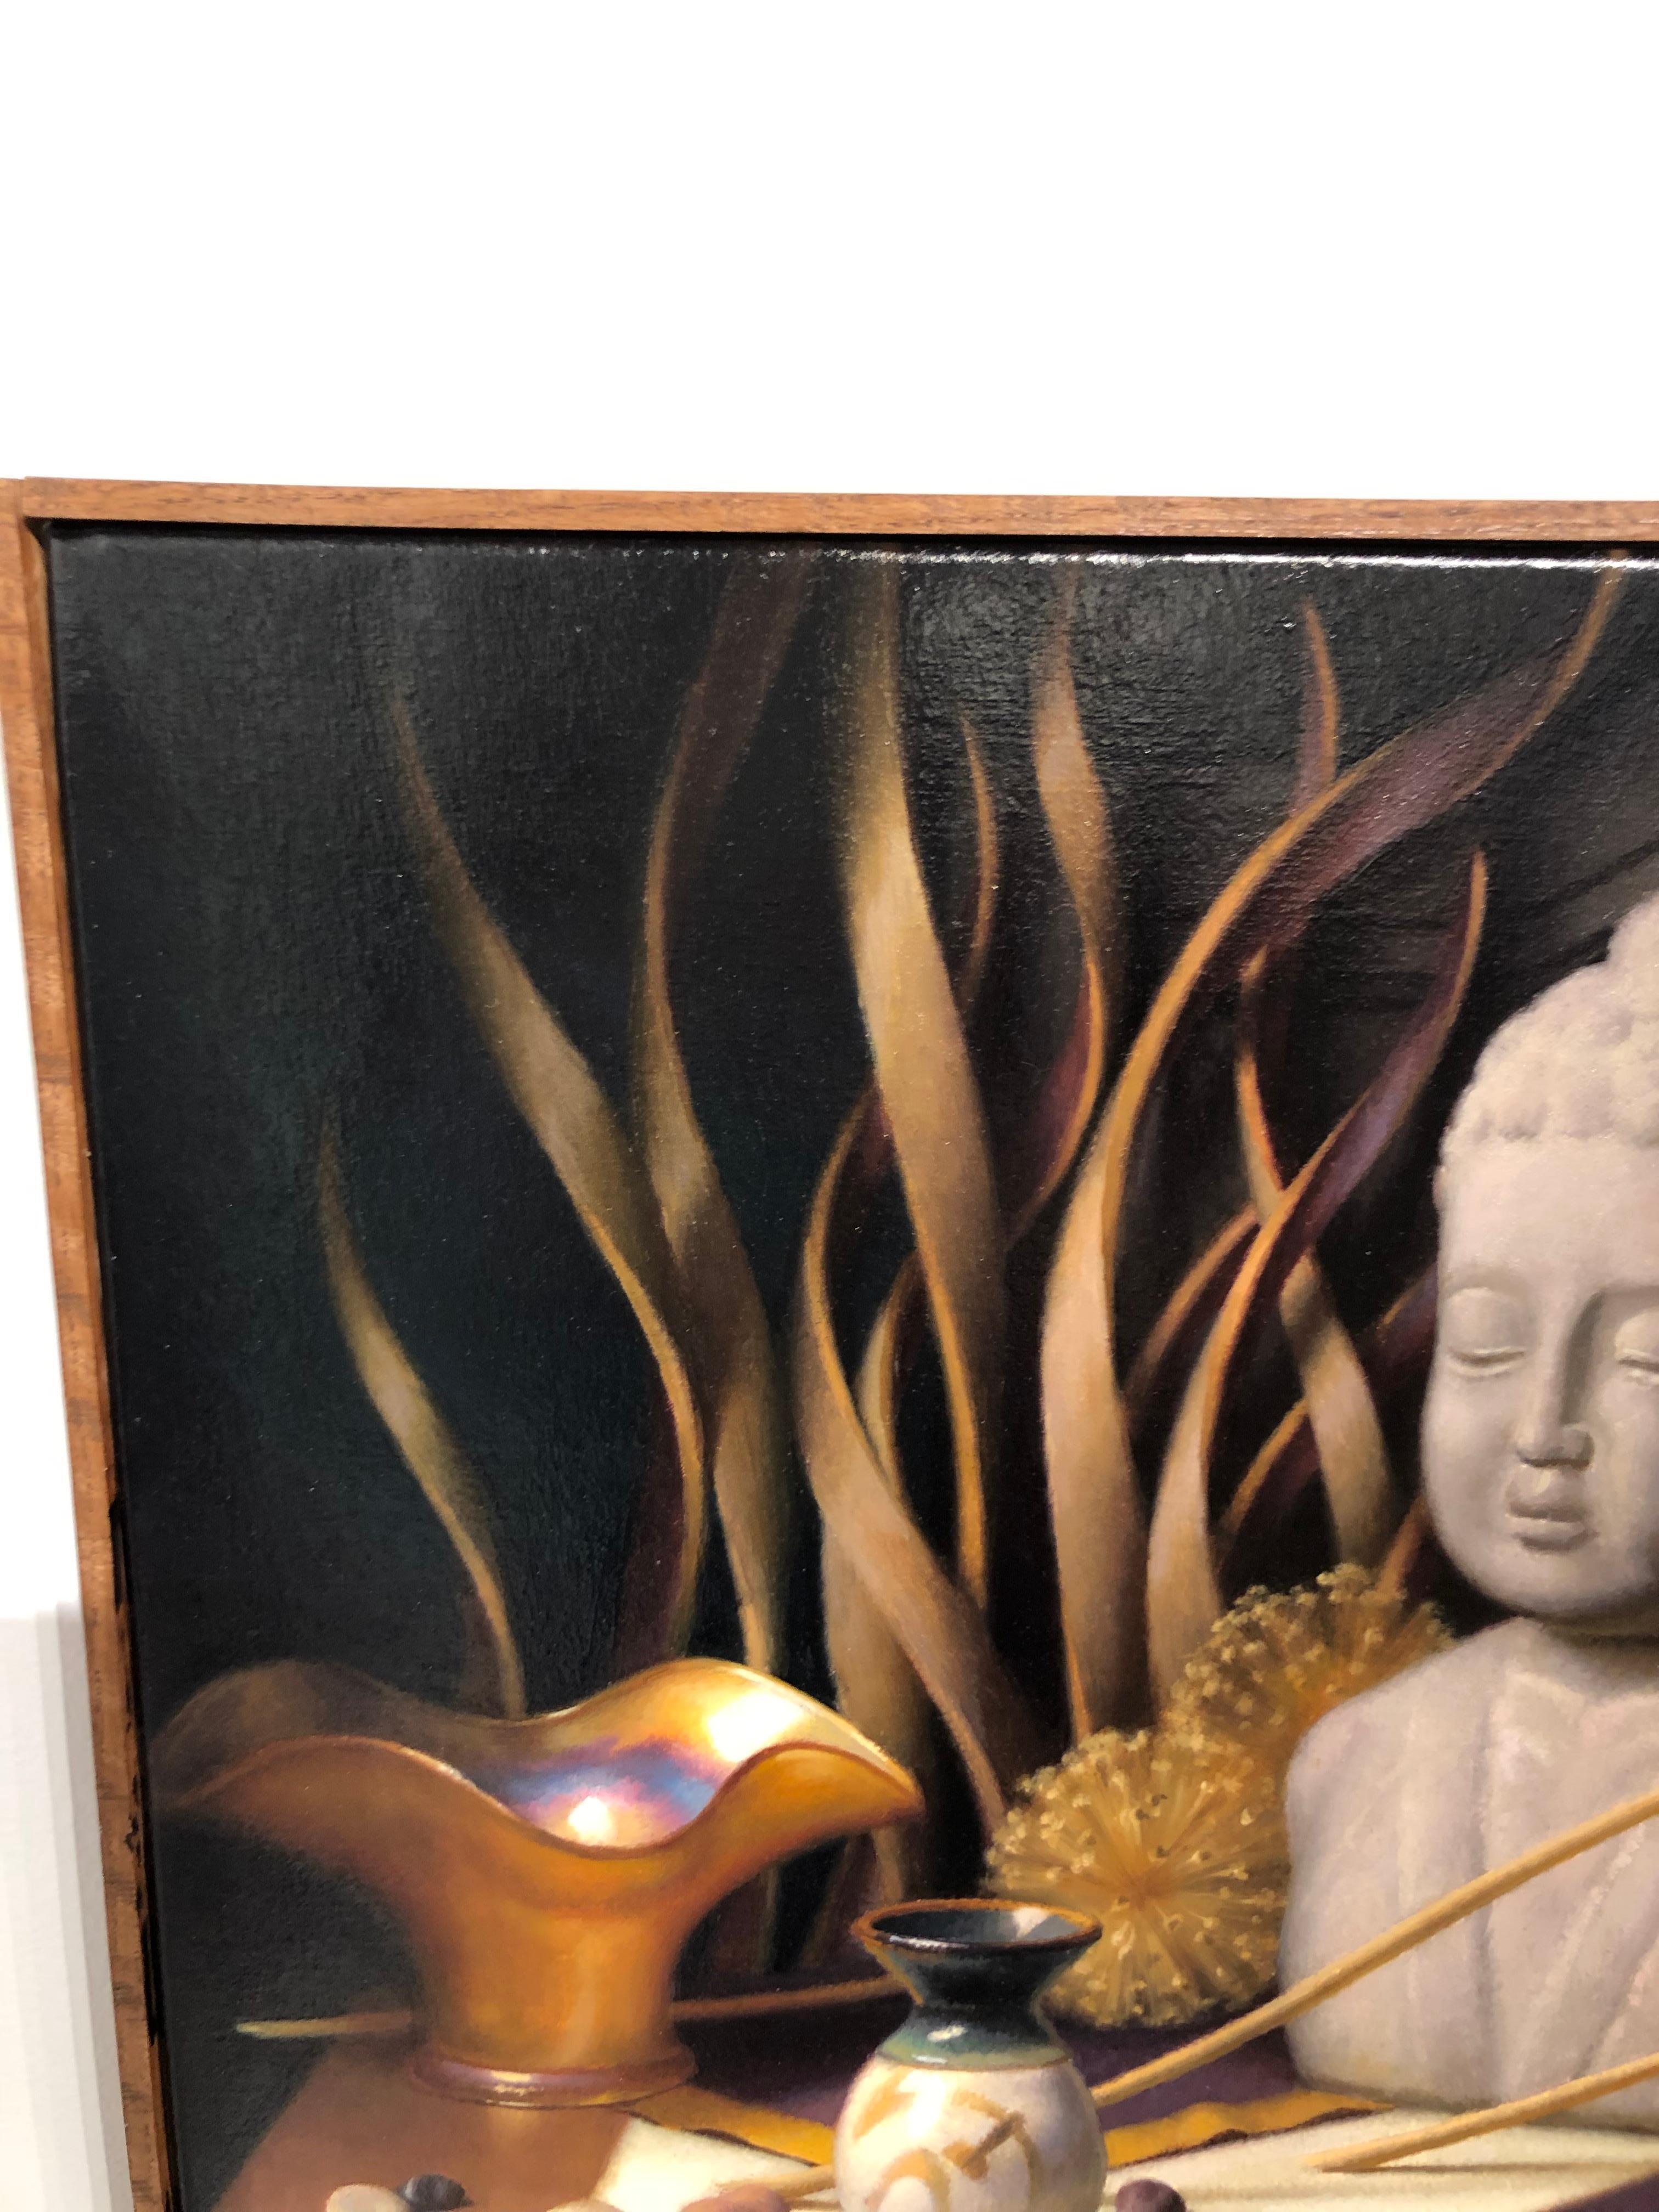 Contemporary Still Life with Buddha, Original Oil Painting on Canvas by Michael Chelich